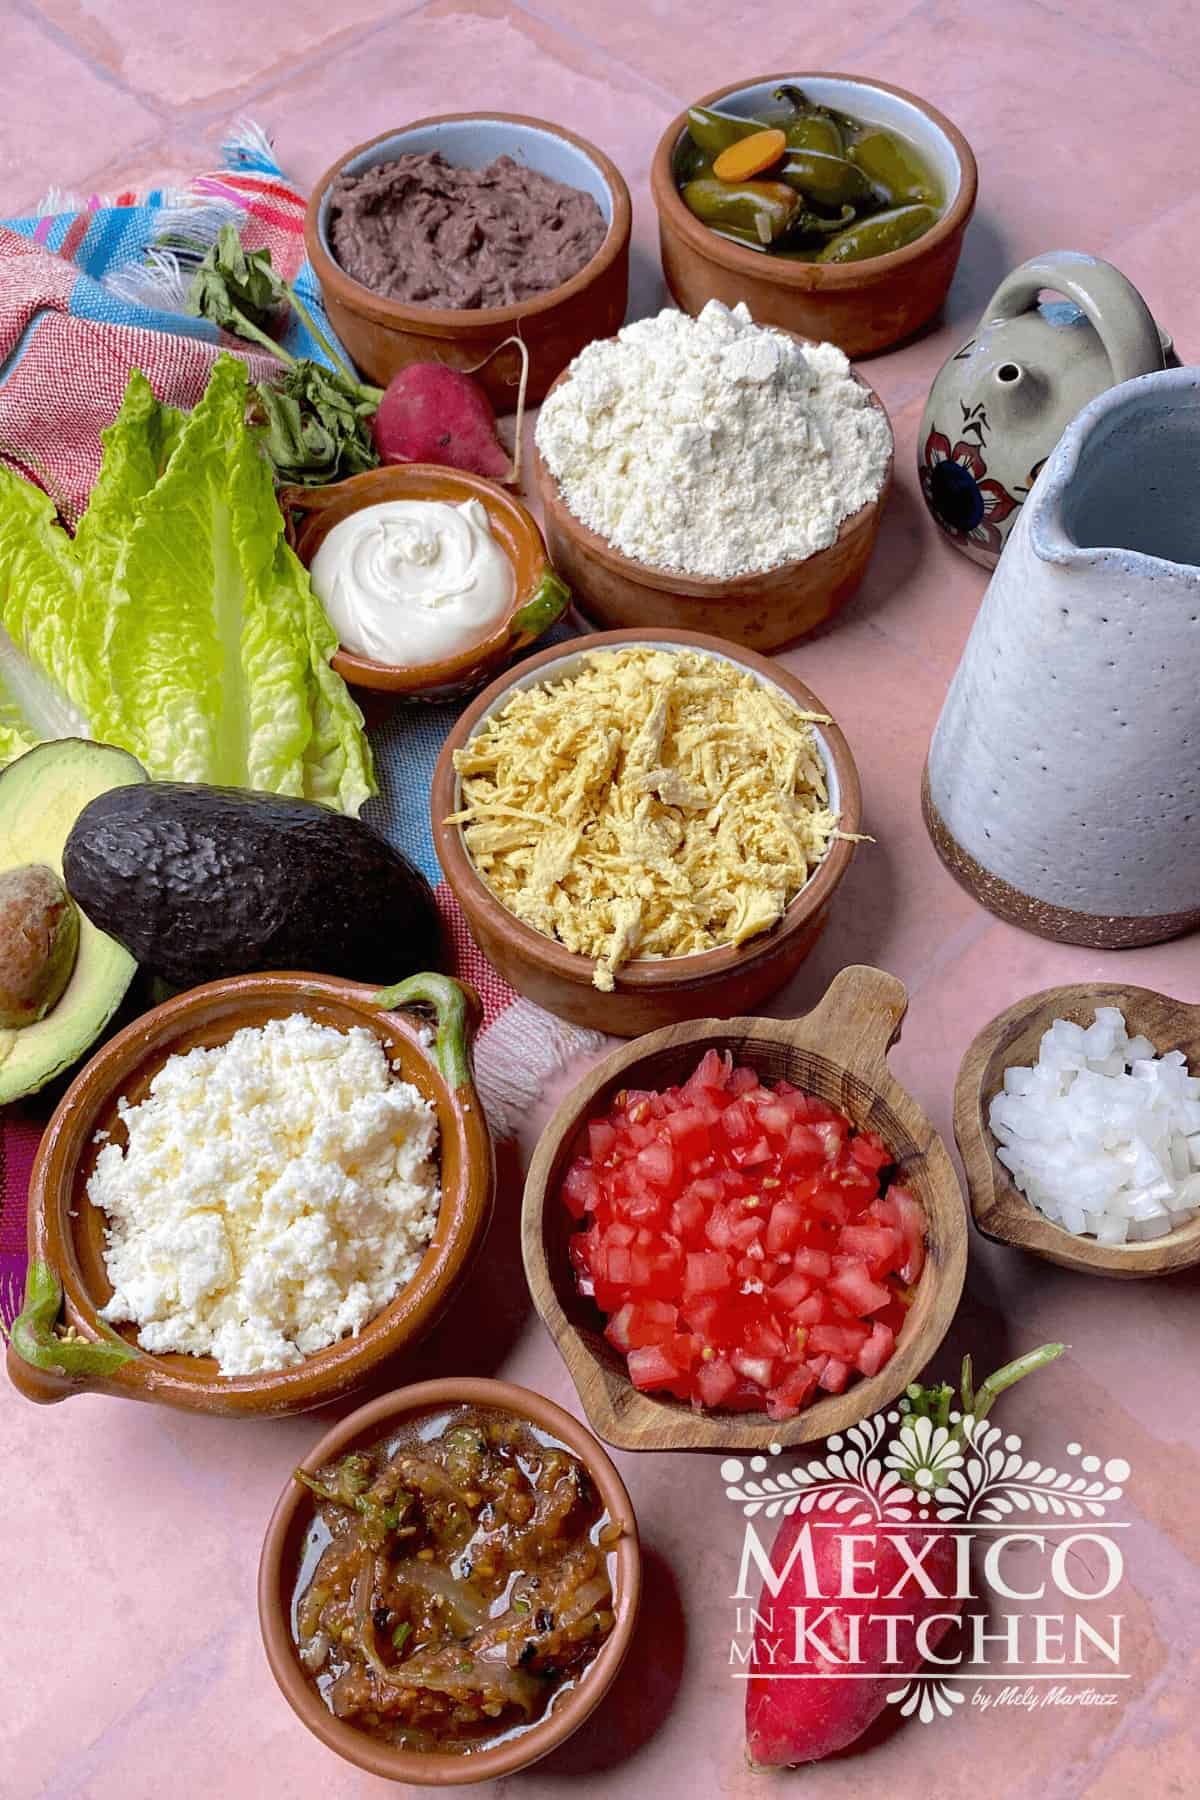 Ingredients for Mexican Sopes like masa harina, beans, chicken, queso fresco, tomatoes, and lettuce.